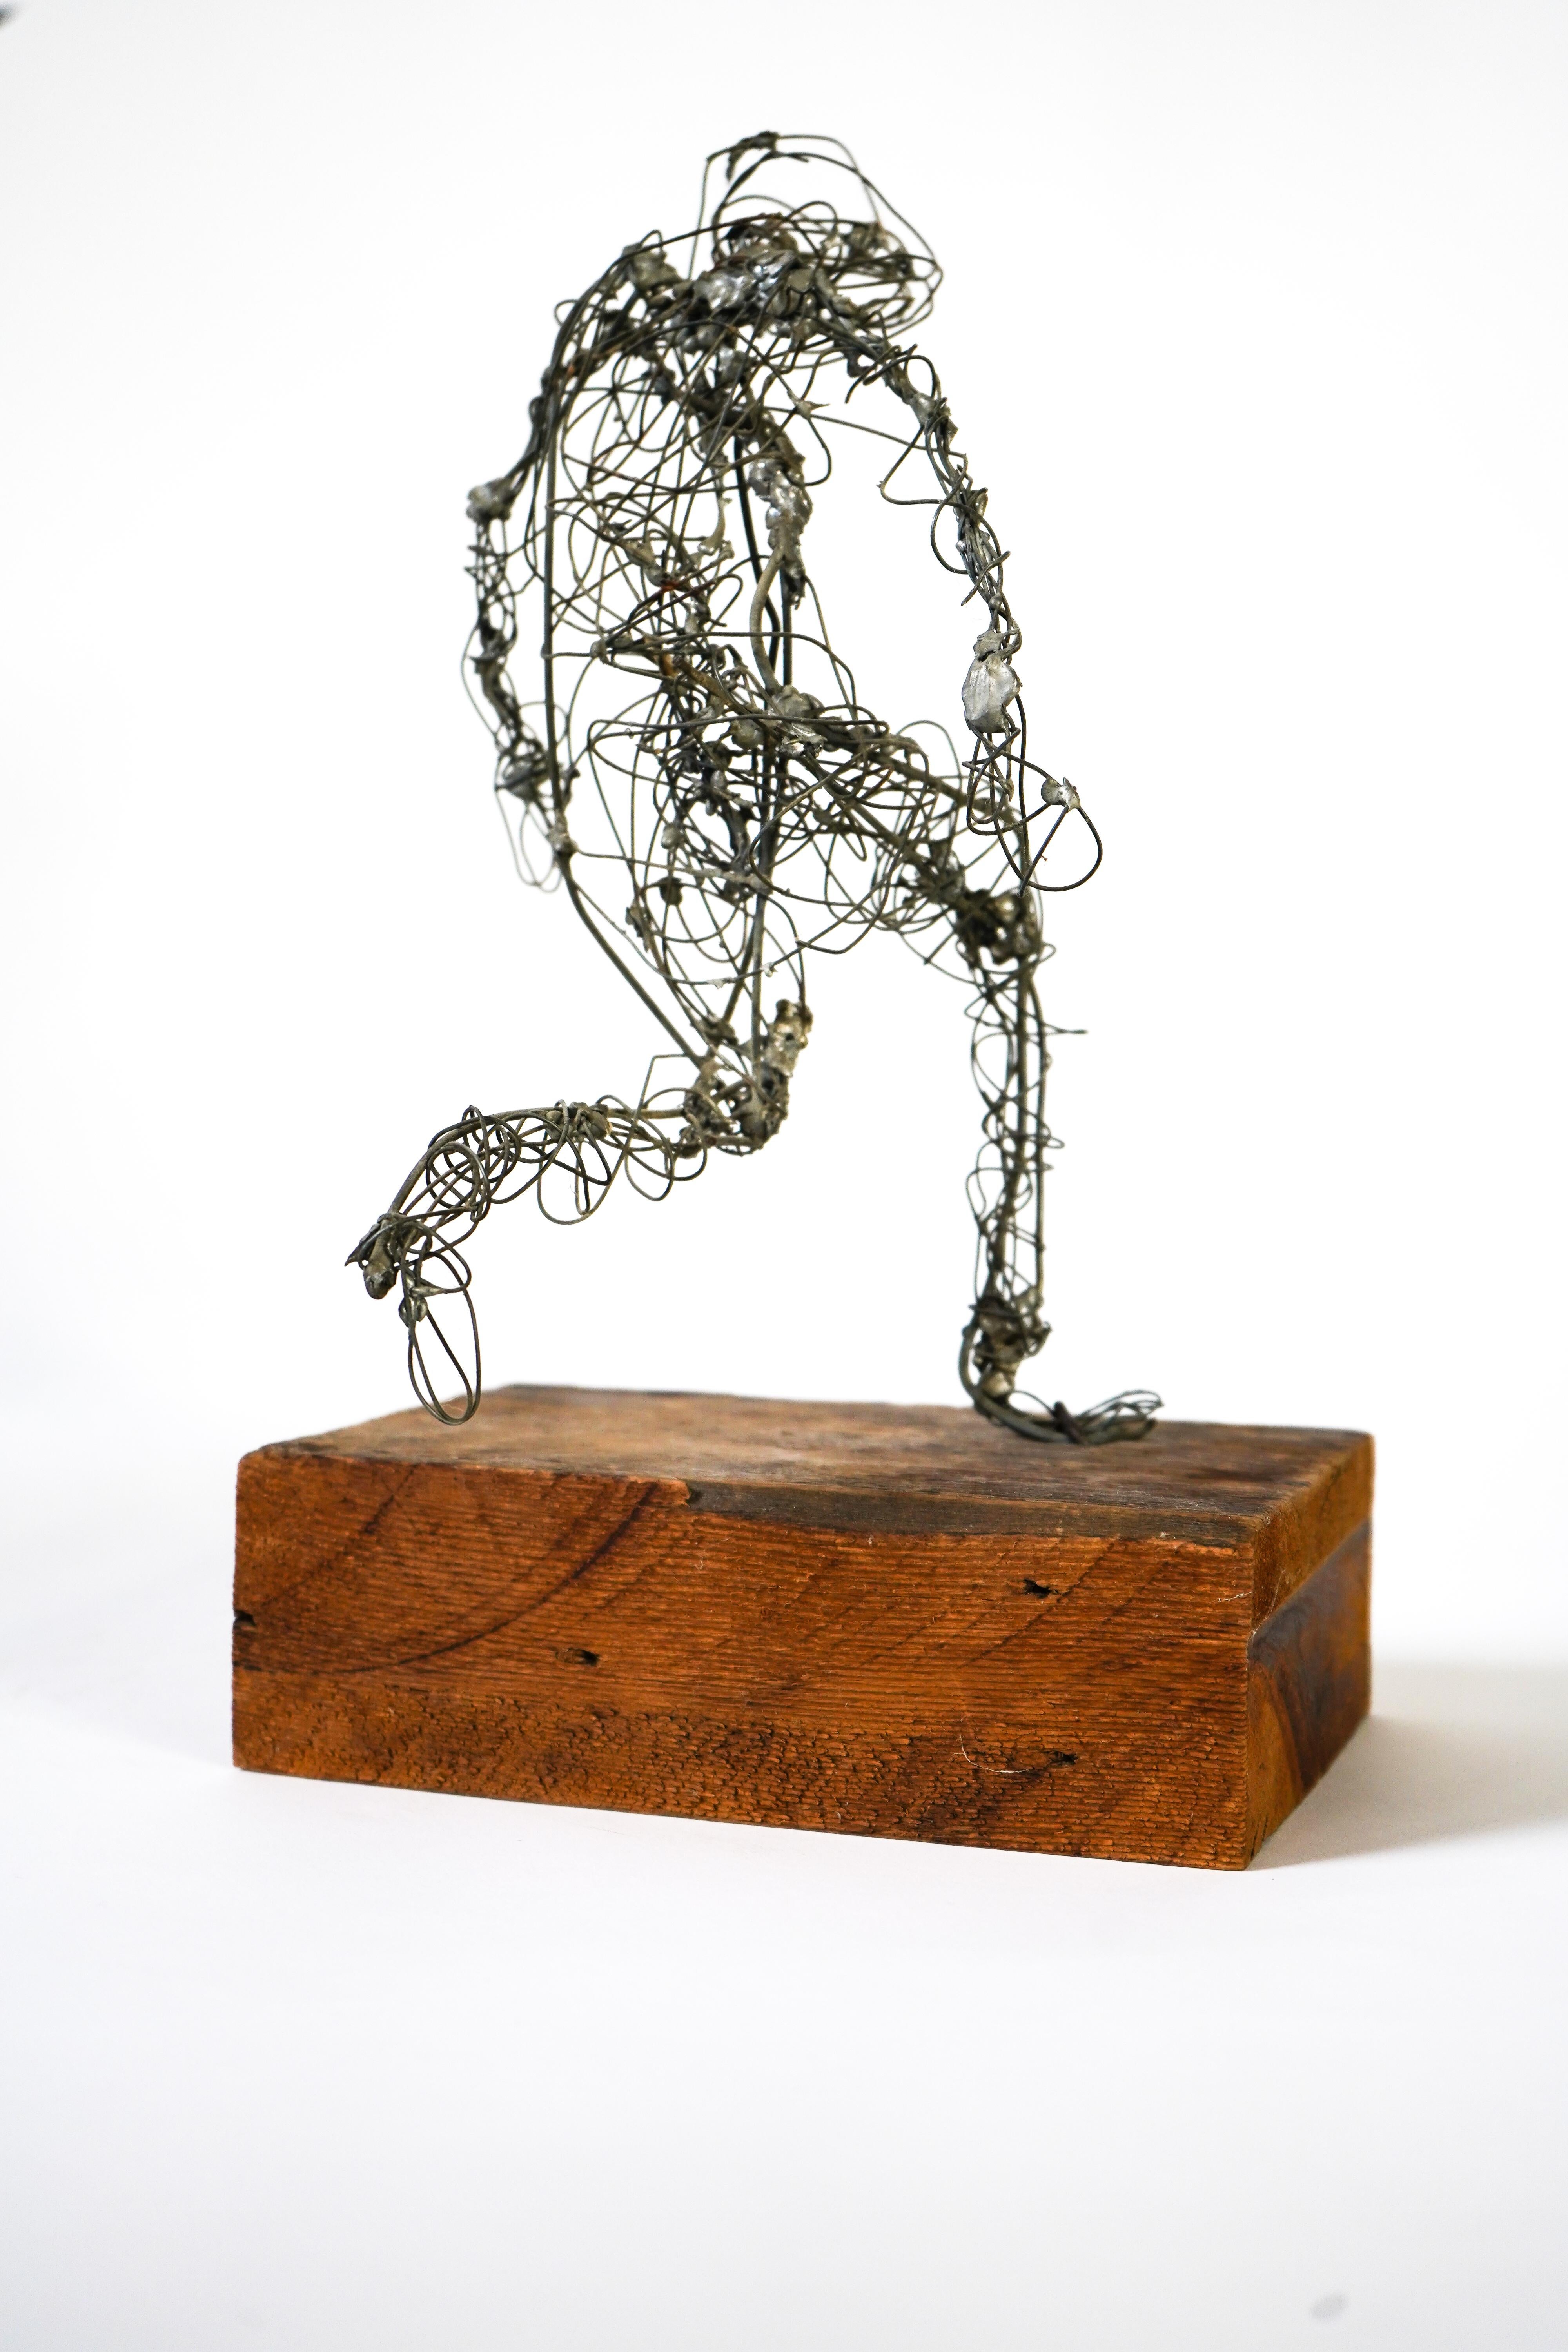 Frances Venardos Gialamas Abstract Wire Figure In Motion Sculpture In Good Condition For Sale In Chalk Hill, PA